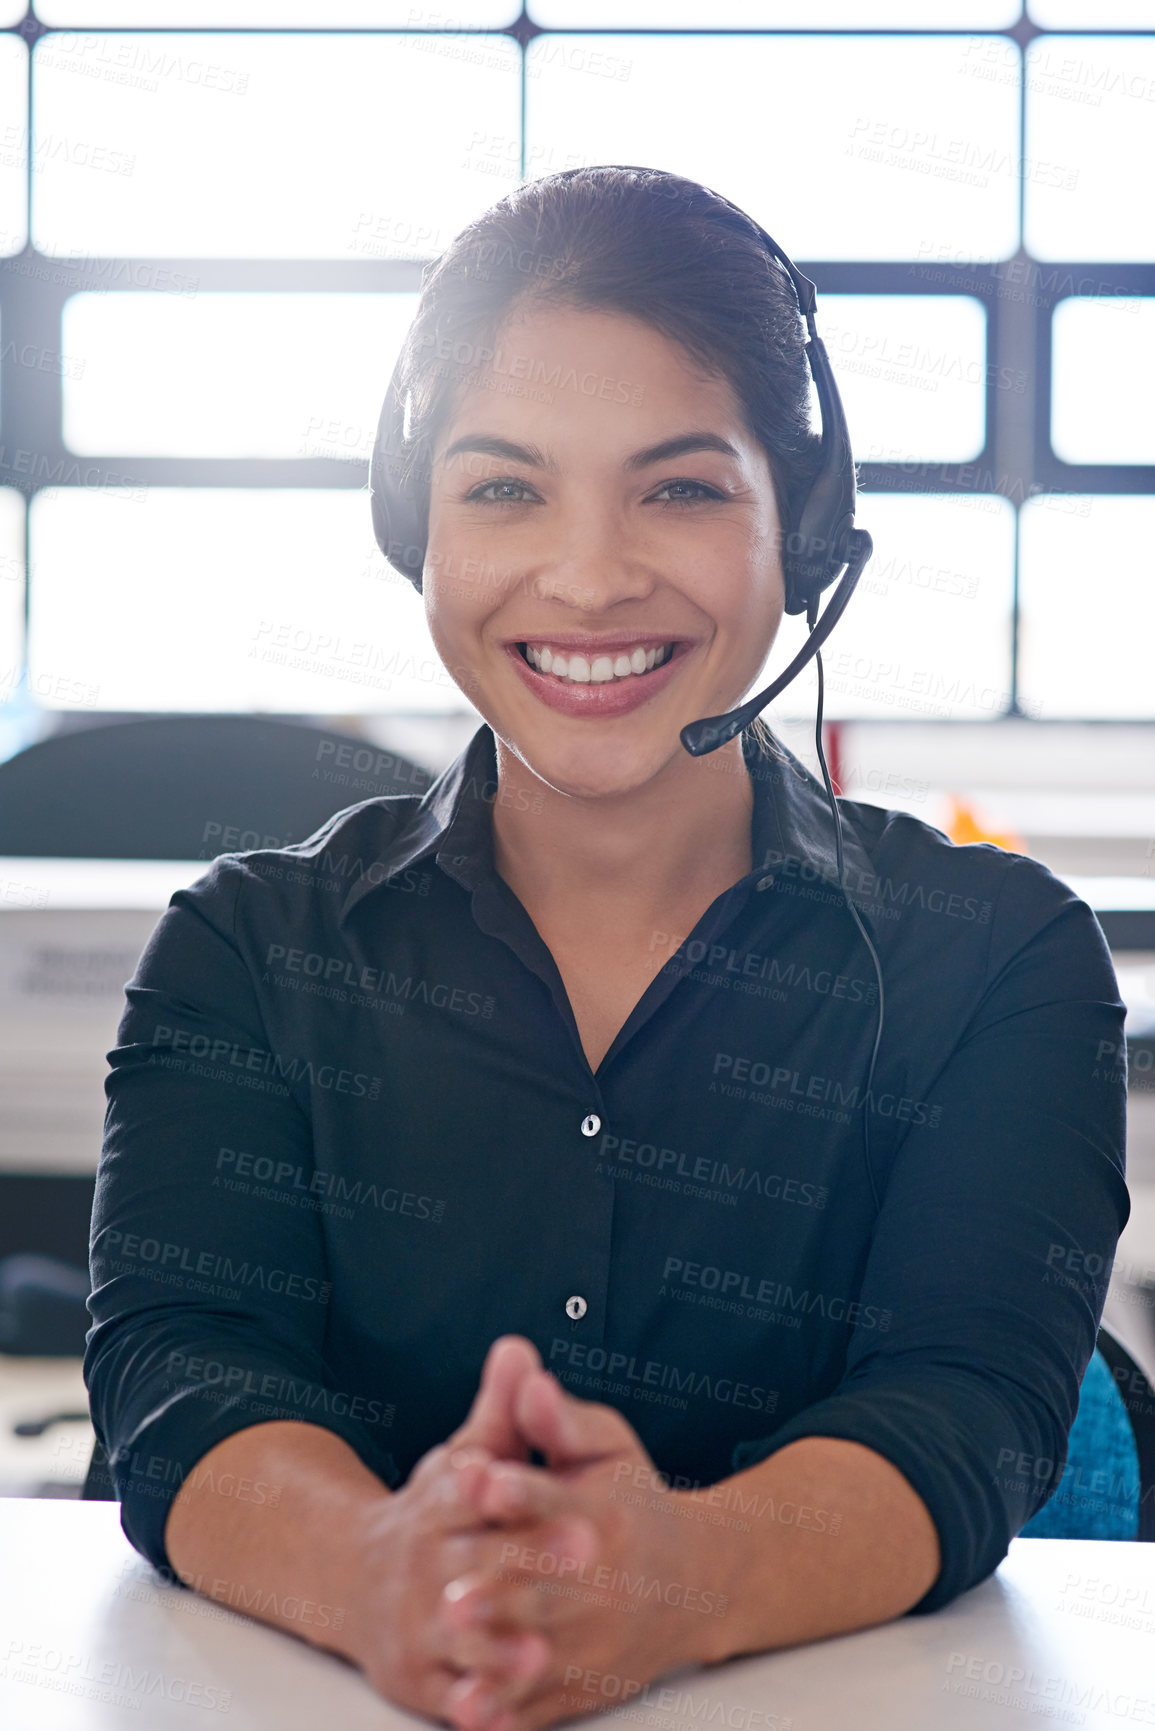 Buy stock photo Shot of a call centre agent sitting at her desk in a modern office